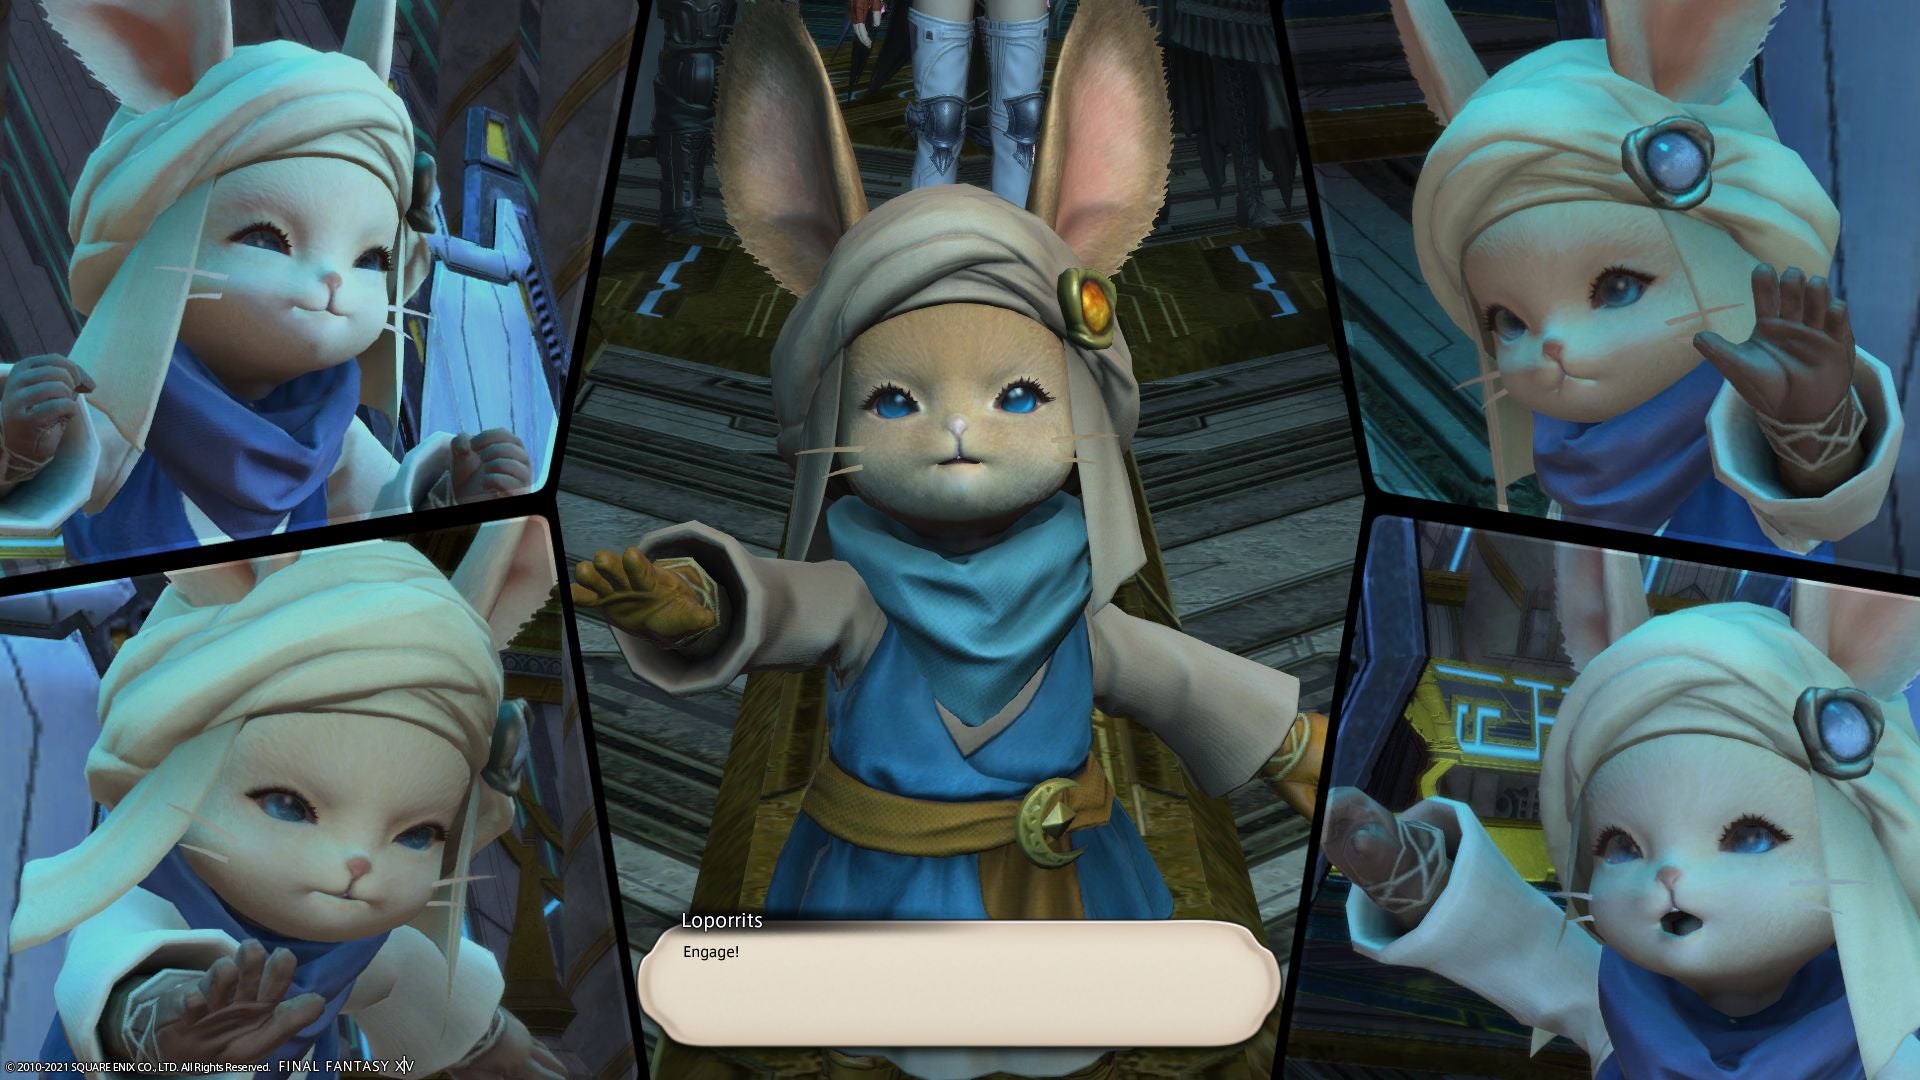 Final Fantasy 14 - A bunny creature called Loporrits says 